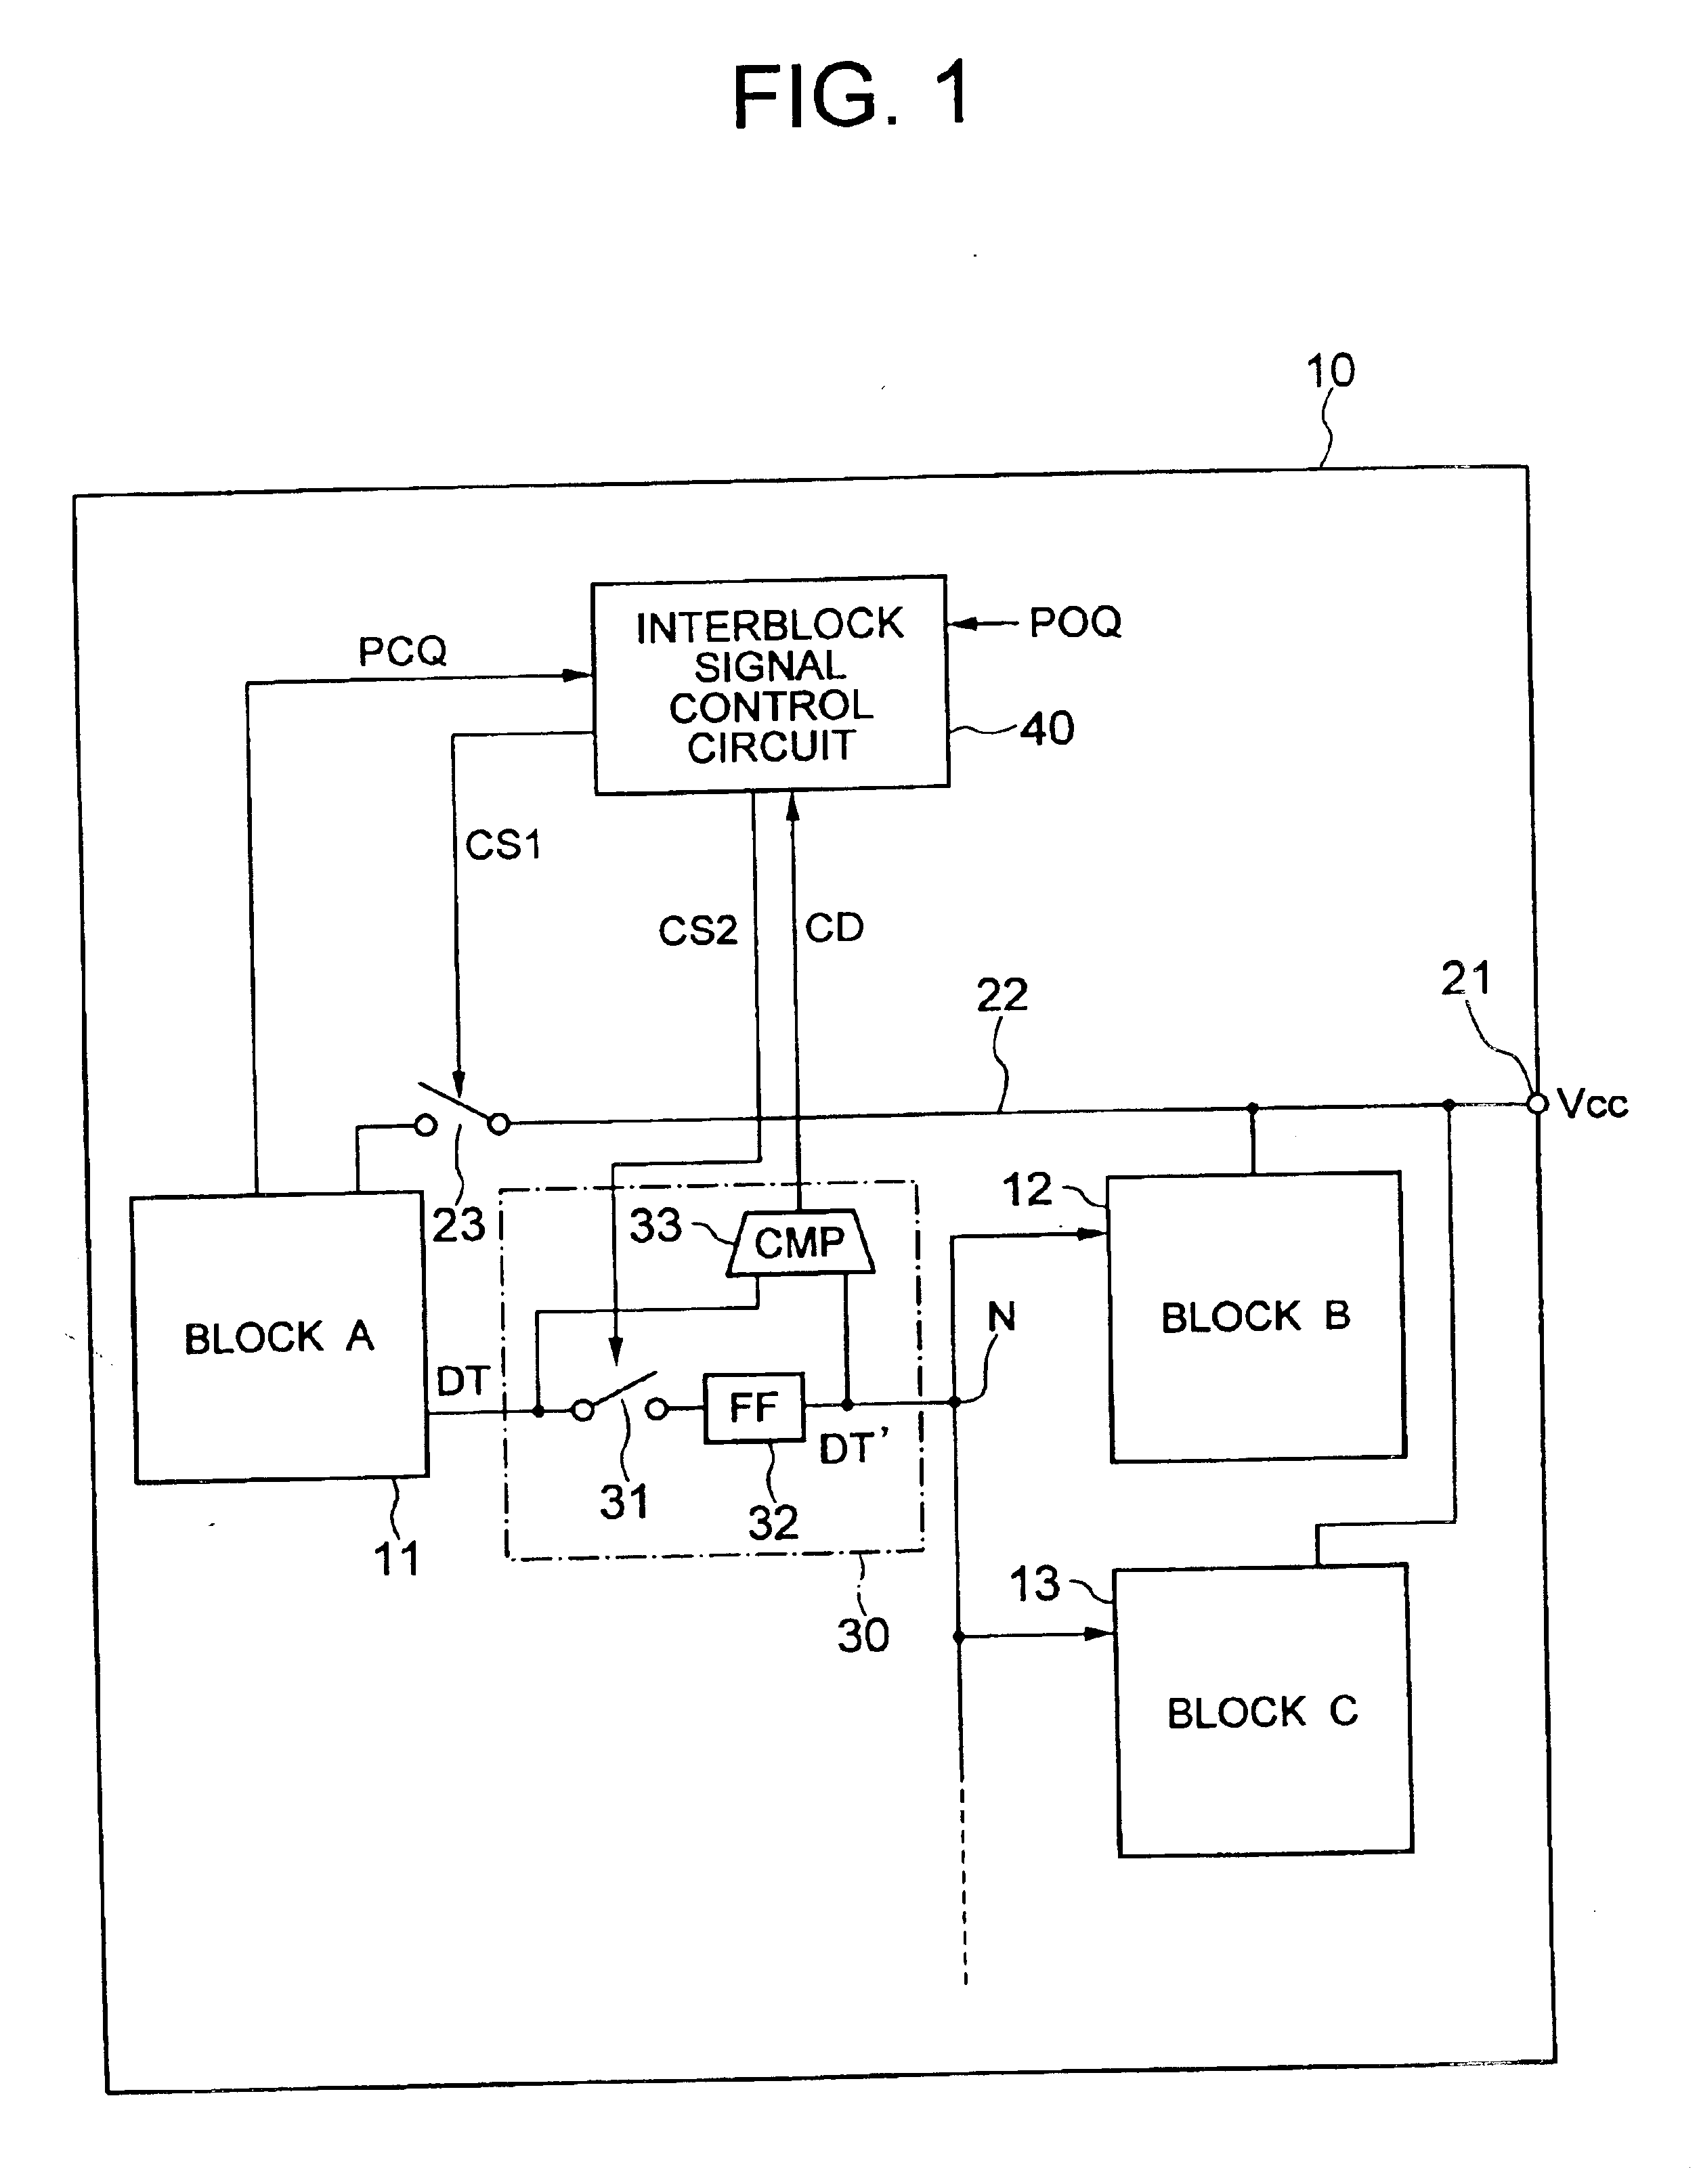 Multiple circuit blocks with interblock control and power conservation